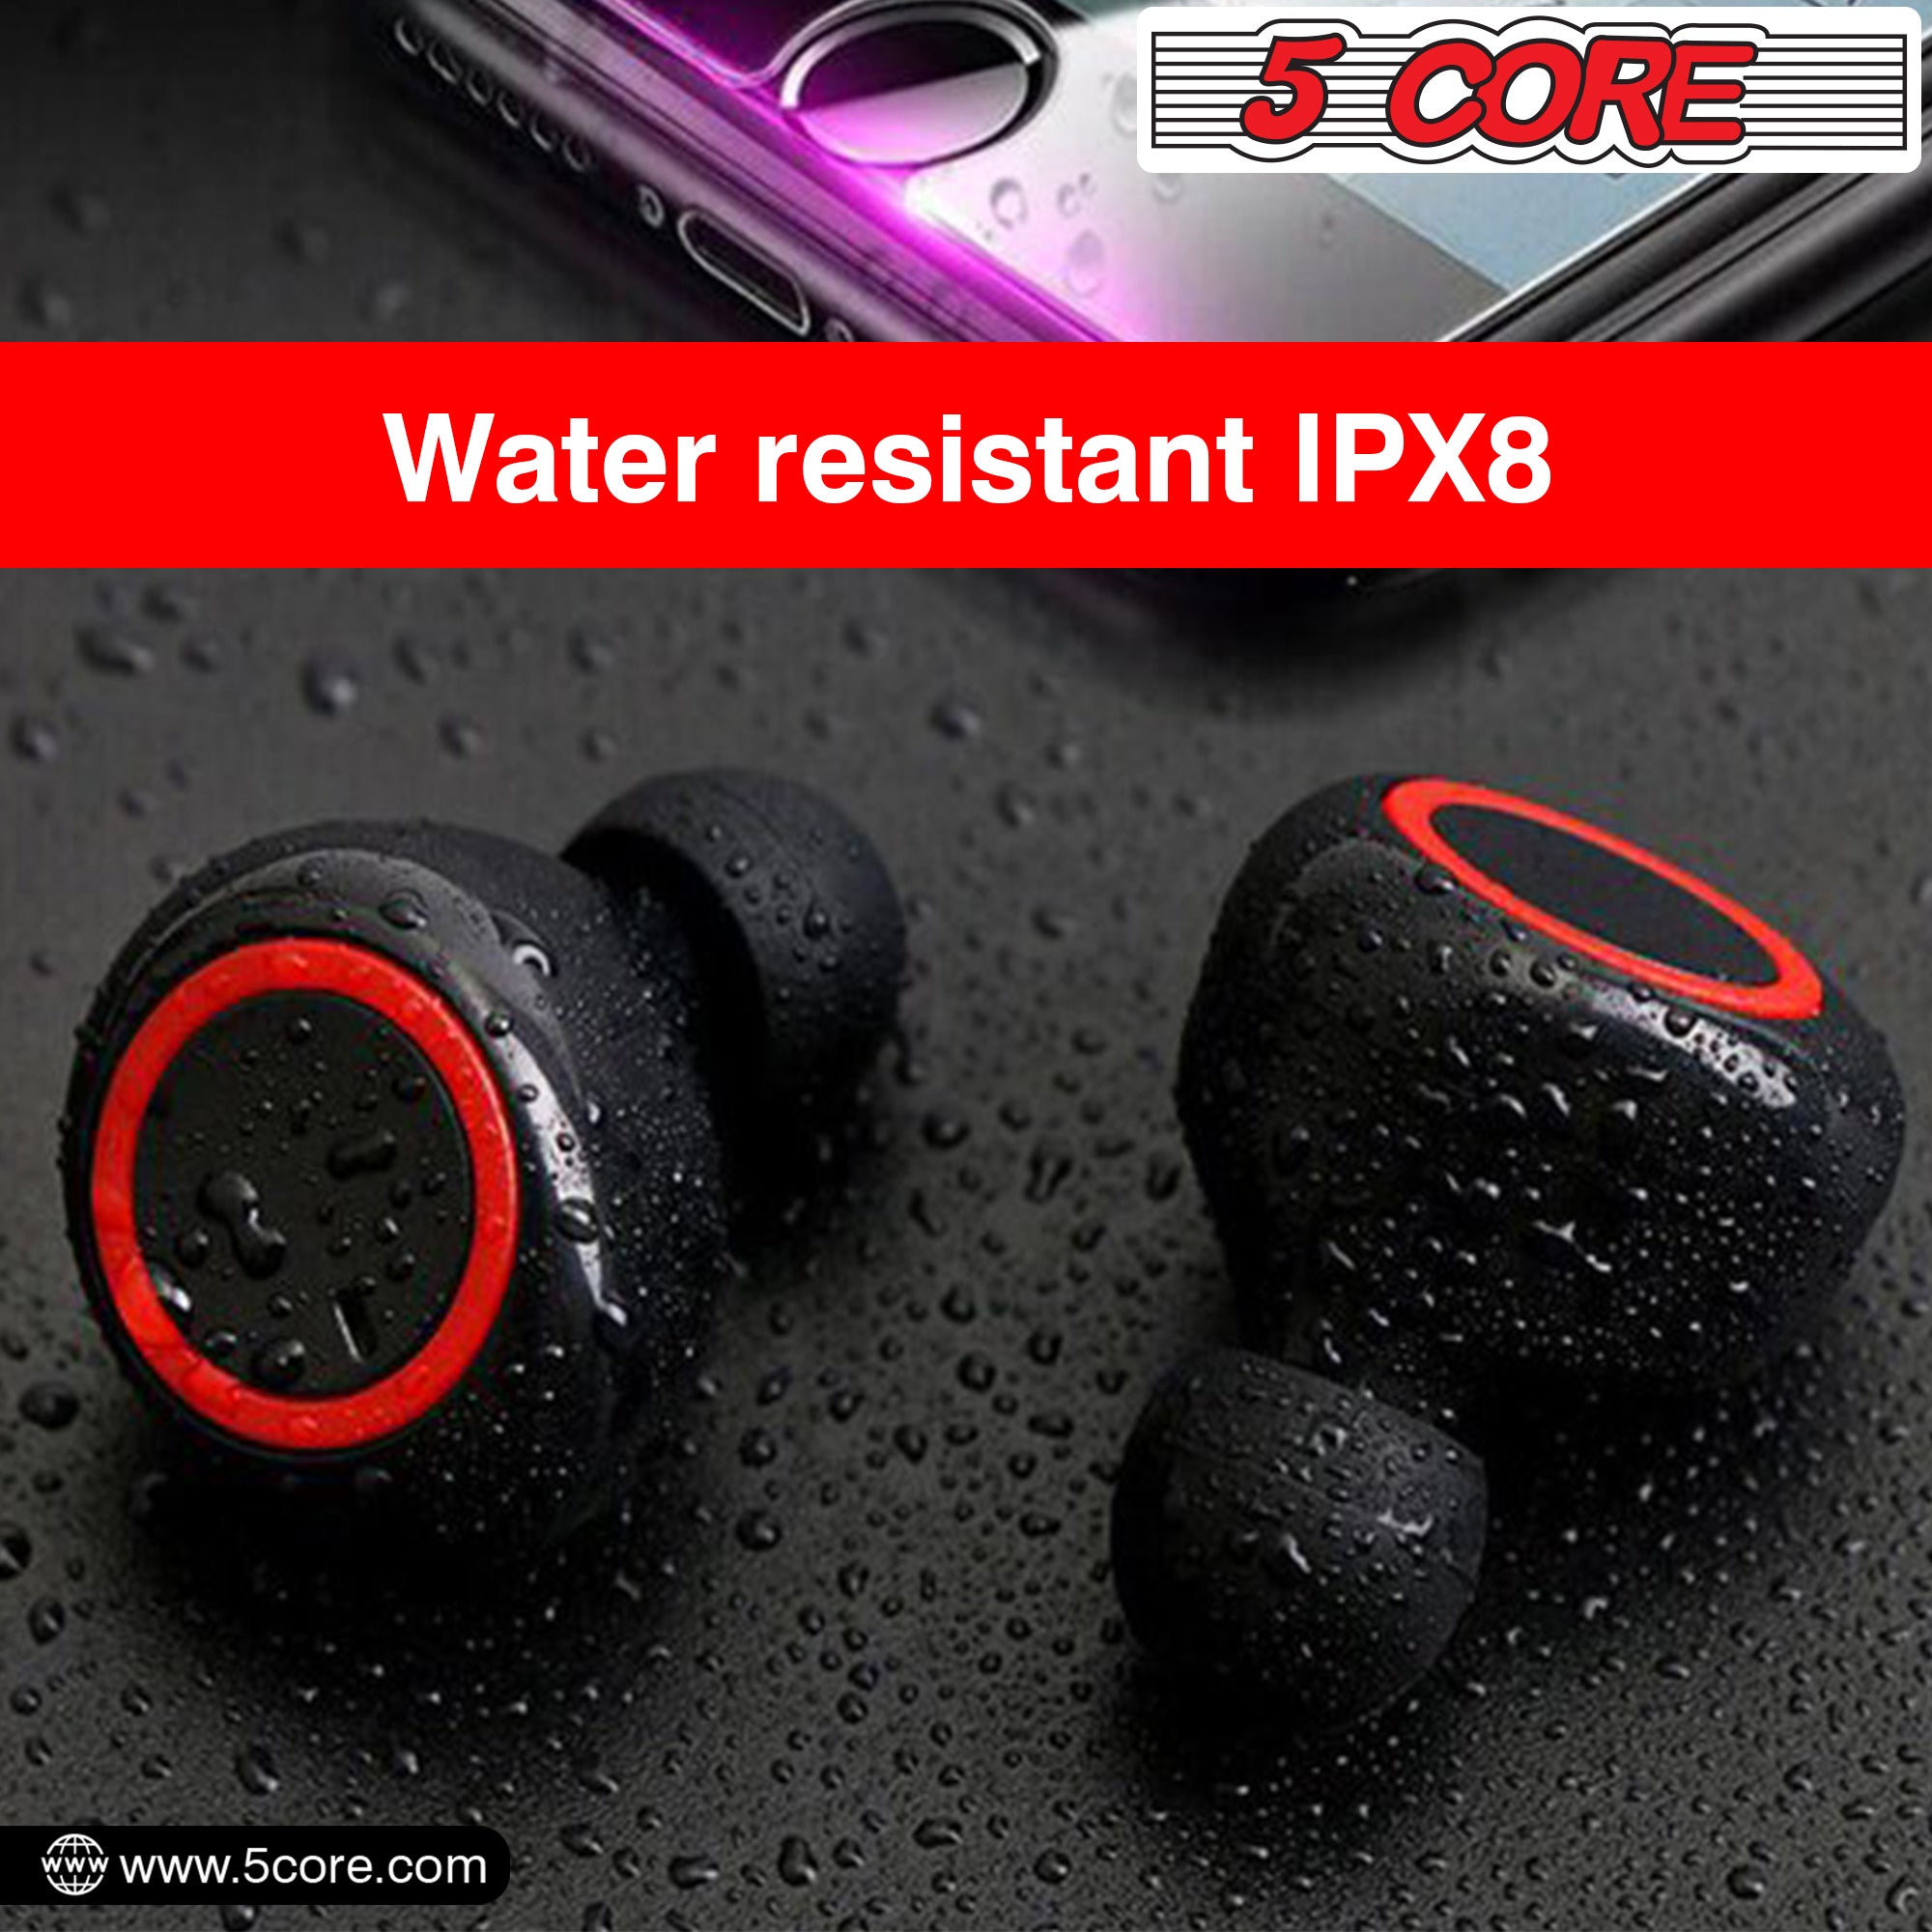 Waterproof IPX8 Earbuds: Perfect for Sports and Outdoor Activities